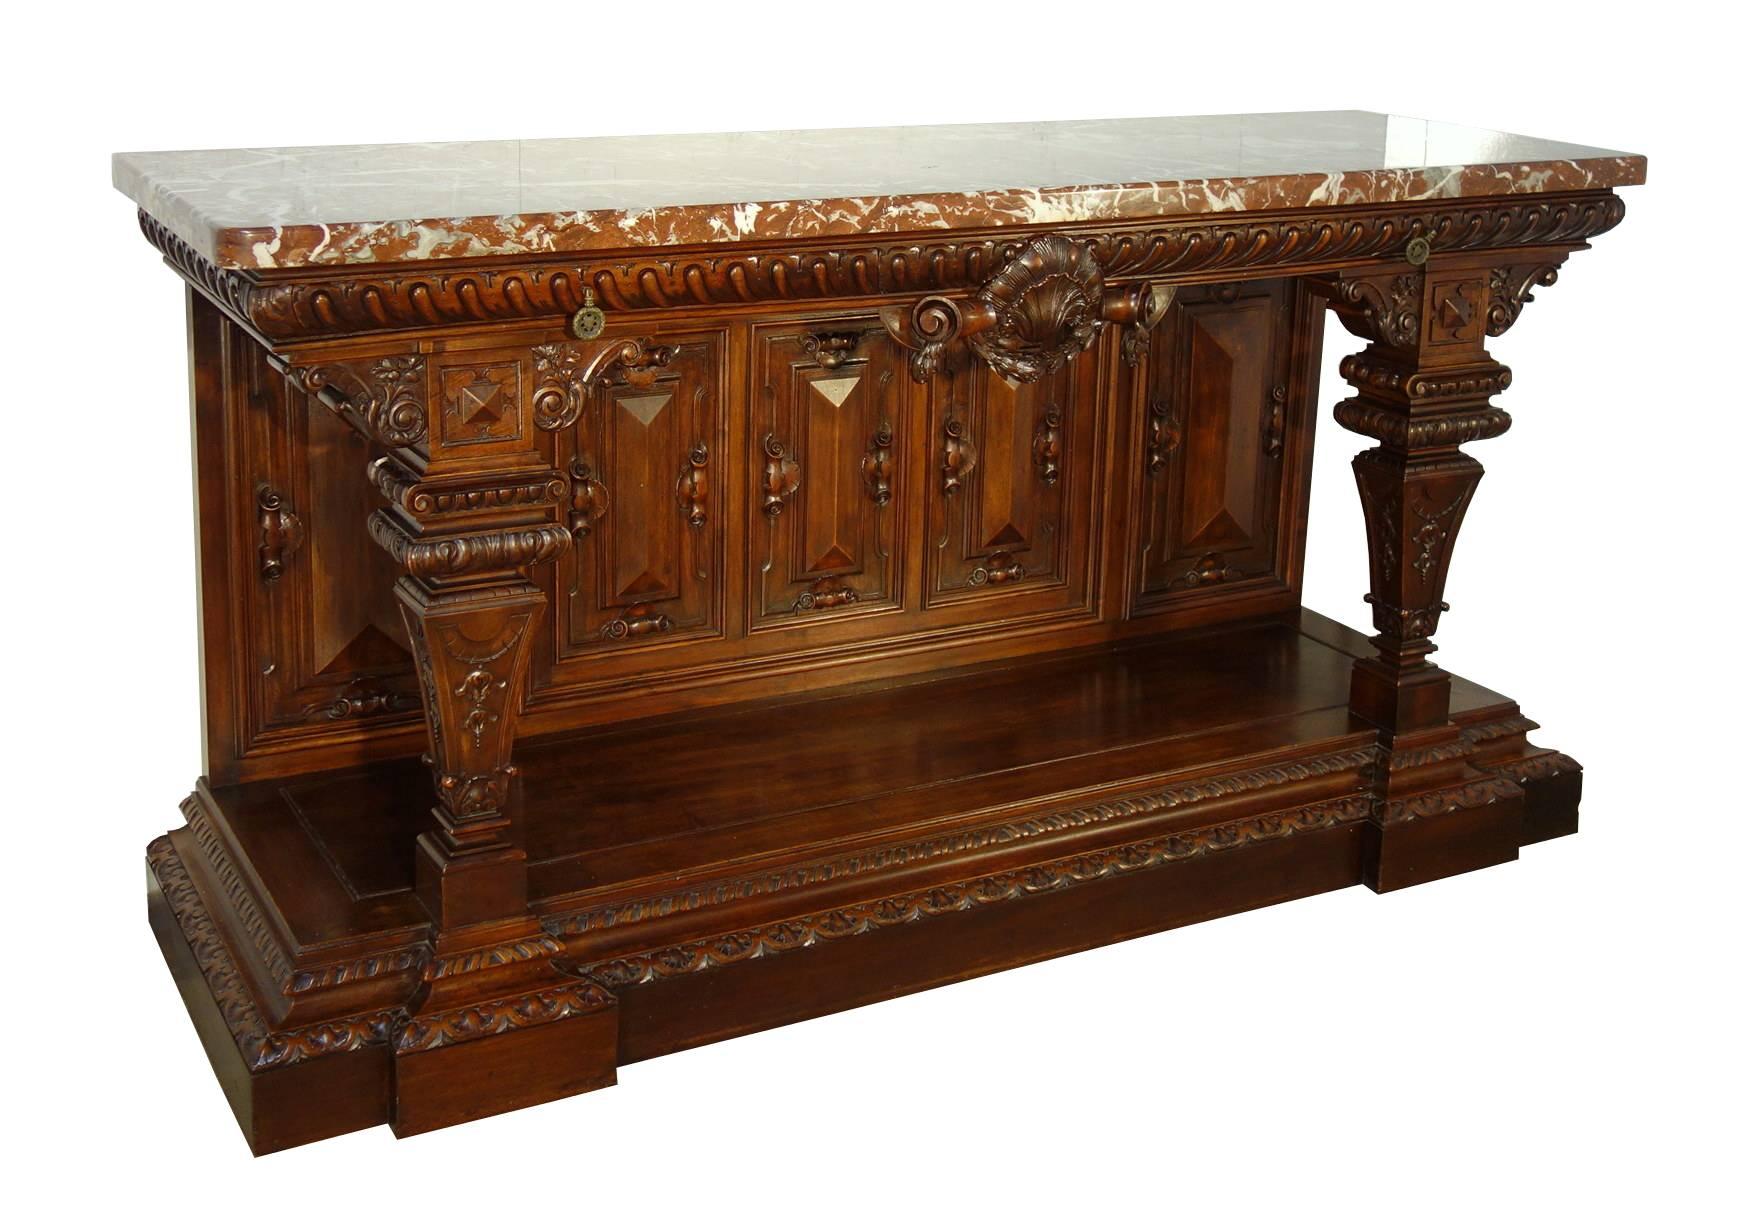 Incredible large Tuscan hand-carved solid walnut console table, pure Renaissance style with fine patina.  Marble top in thick Breccia Rosa, two drawers in the top band hand-carved with baccellature, a typical Renaissance motif.  Column square